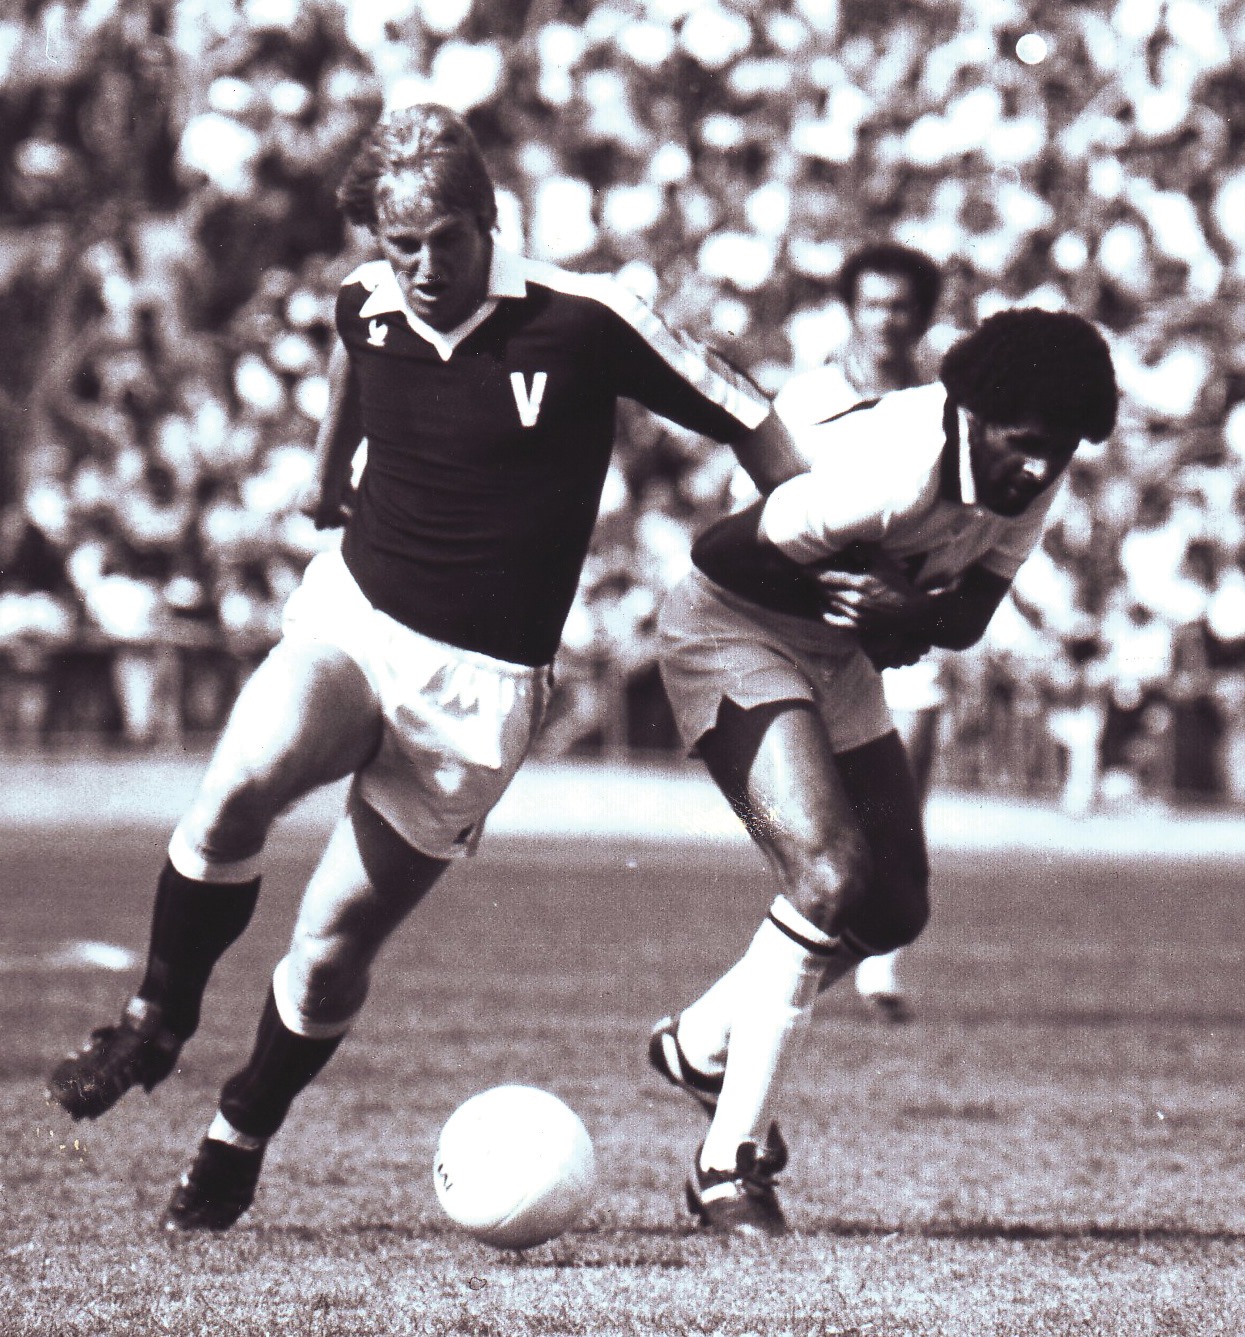 Gary Cole, representing Victoria against the touring New York Cosmos in 1979